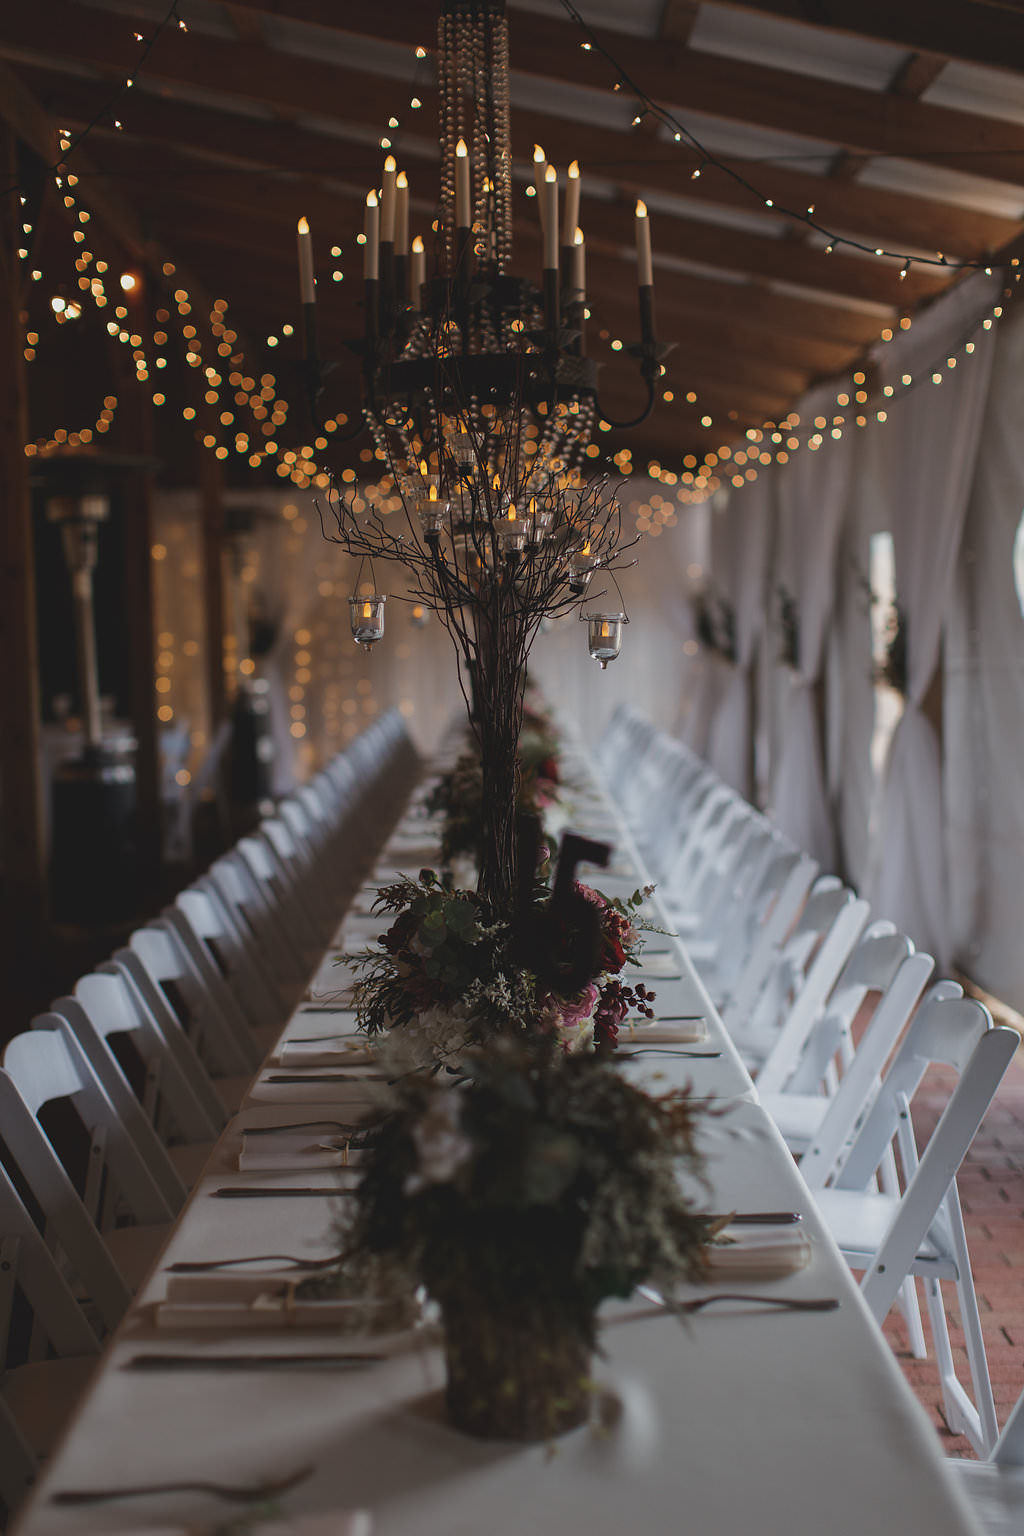 Rustic Barn Wedding Reception with Long White Feasting Table with Natural Greenery Small Centerpieces and Folding White Chairs, Hanging Candelabras and String Lights | Tampa Bay Wedding Venue Cross Creek Ranch